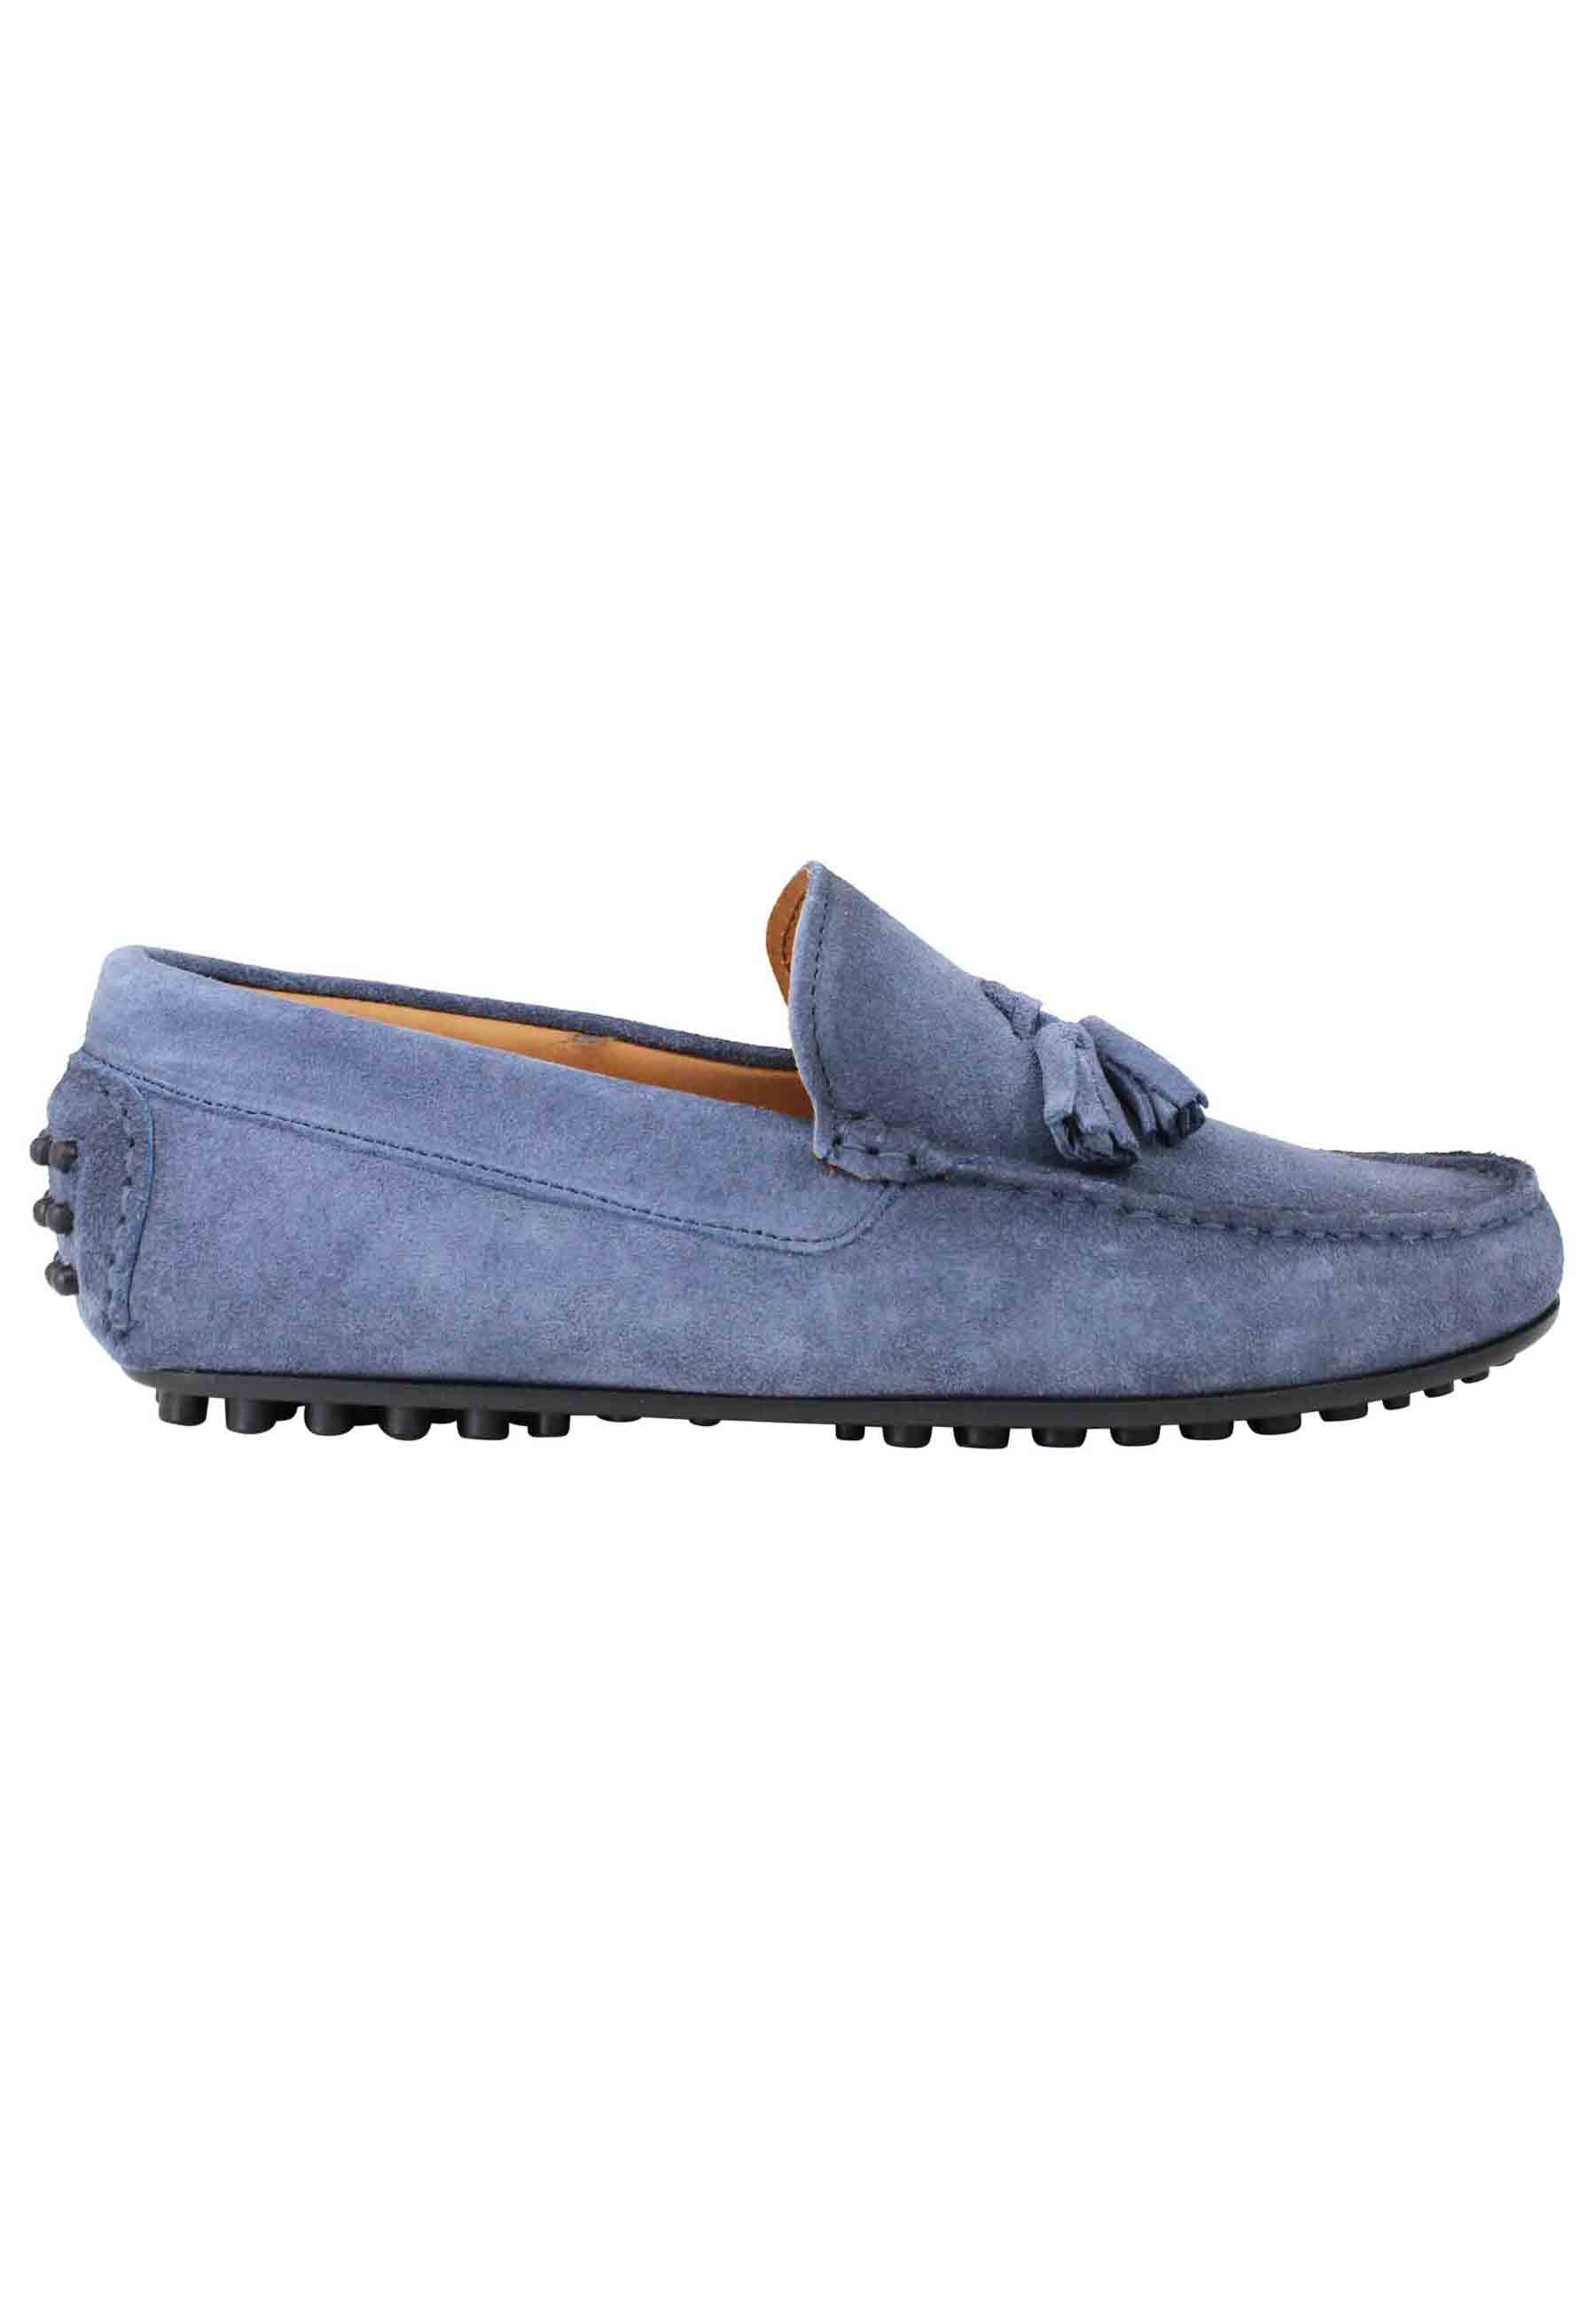 Men's moccasins in blue greased suede with rubber sole